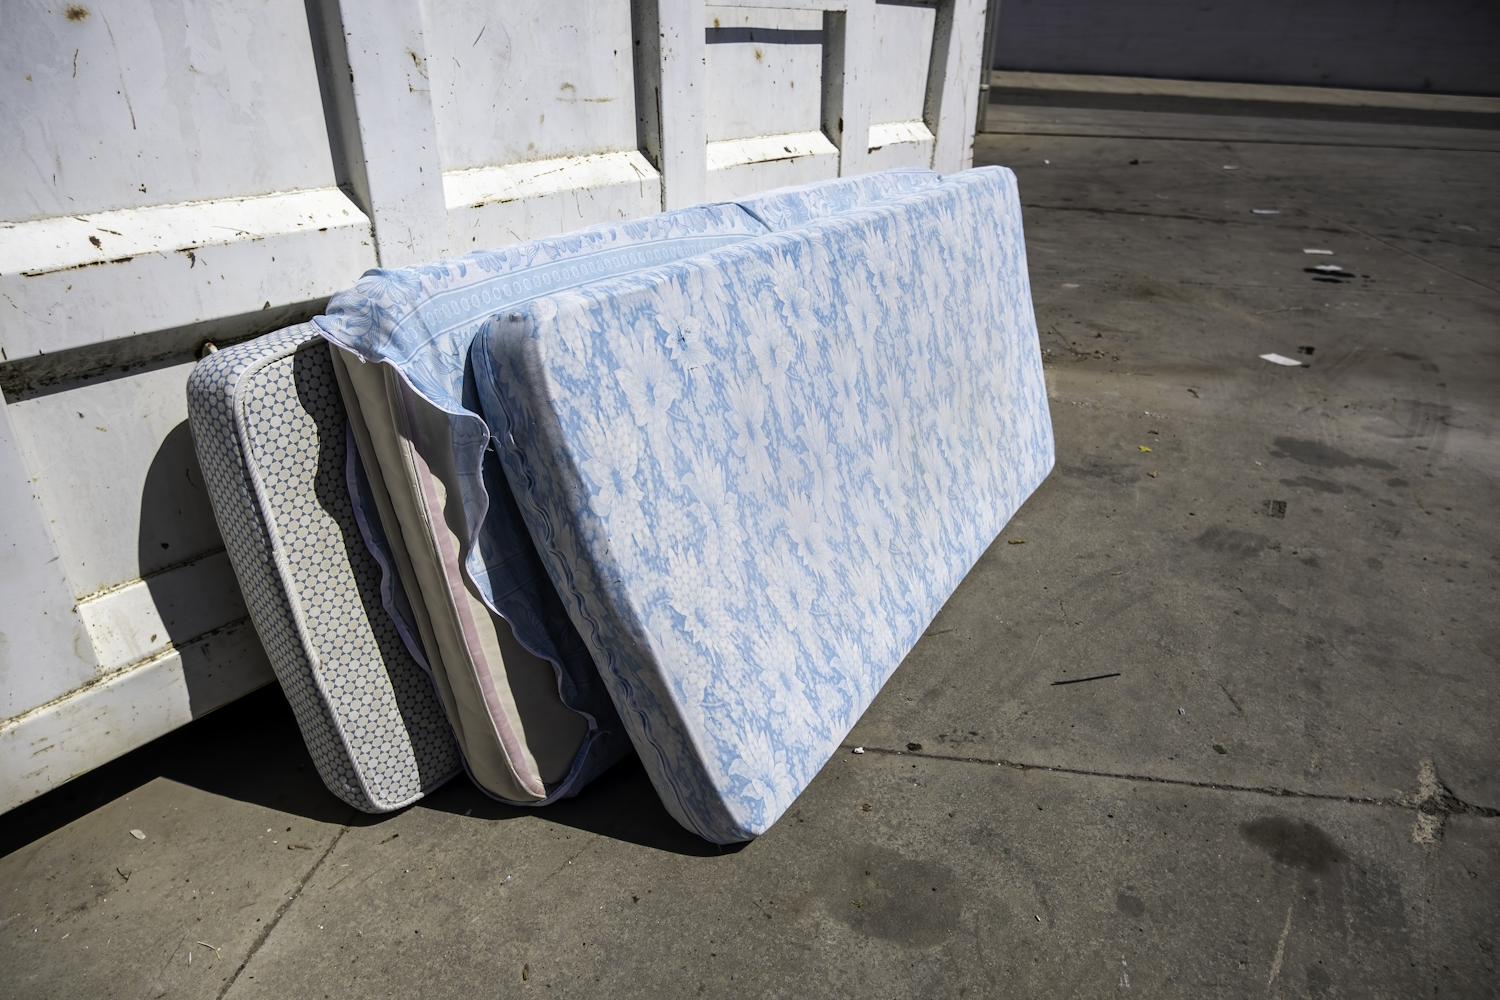 Mattresses in the trash